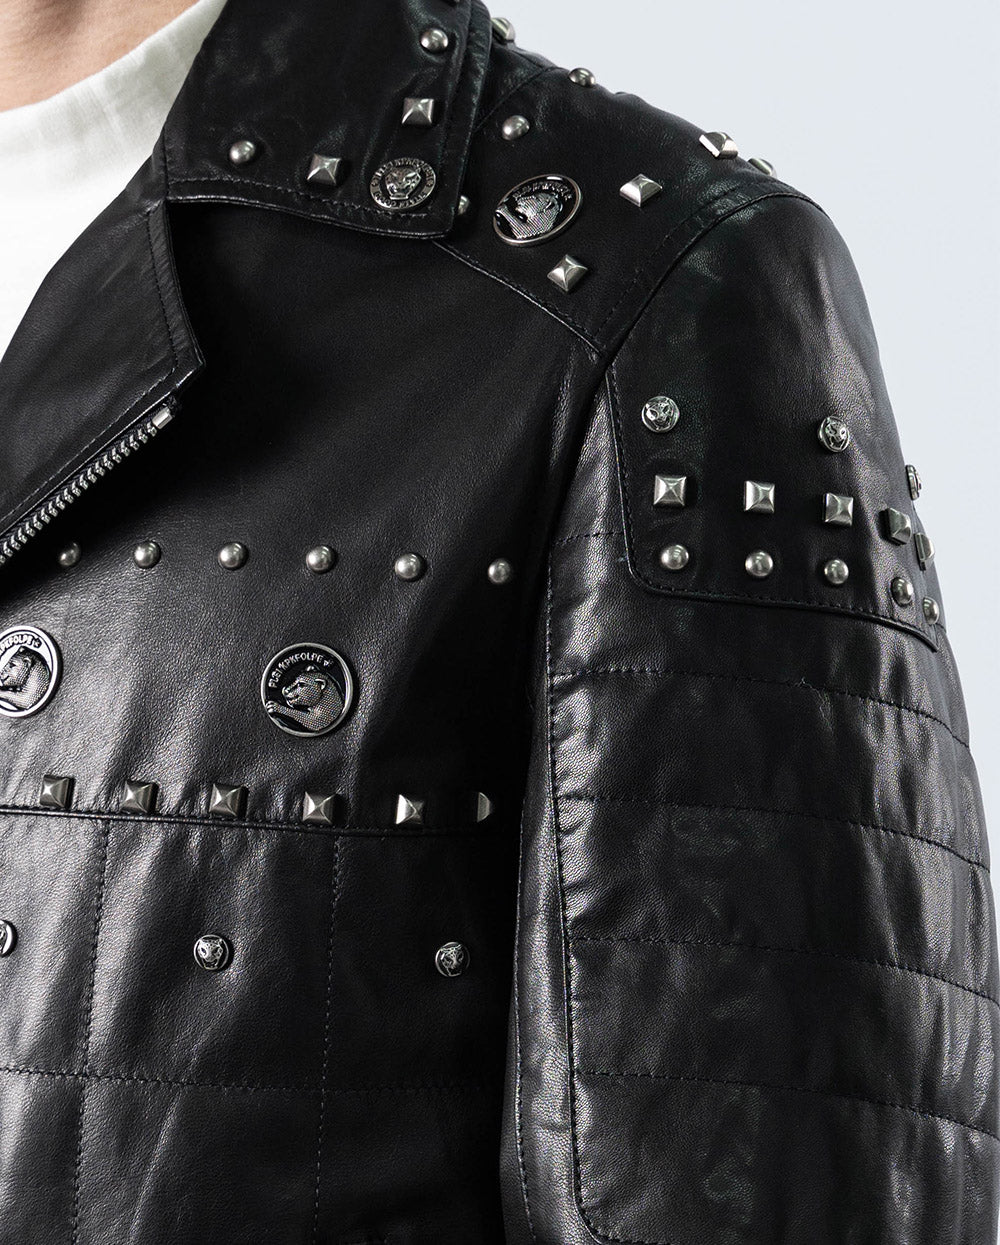 New Woman Black Punk Long Spiked Studded Chains Cowhide Biker Leather  Jacket-17